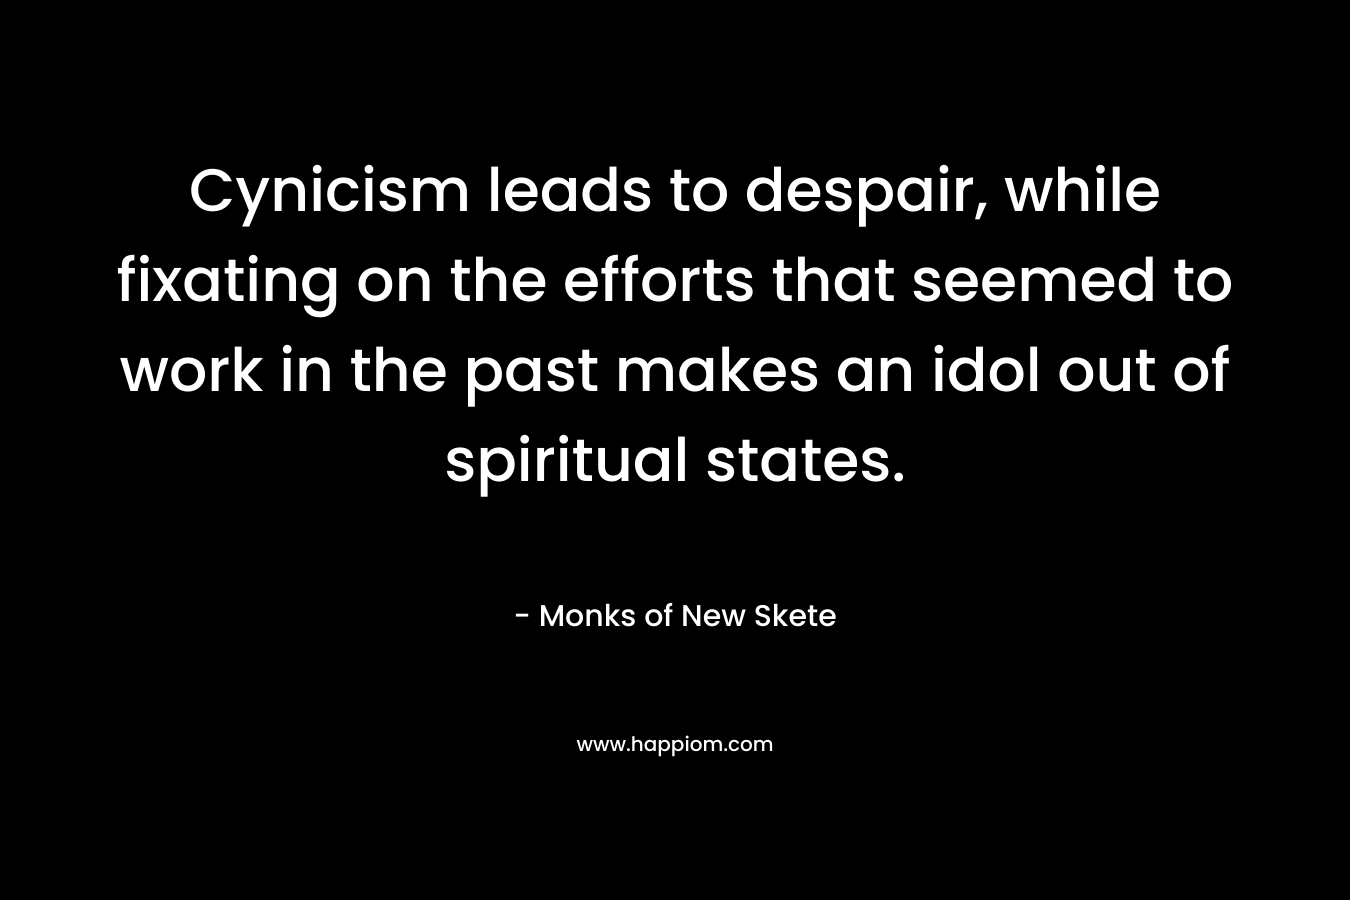 Cynicism leads to despair, while fixating on the efforts that seemed to work in the past makes an idol out of spiritual states.